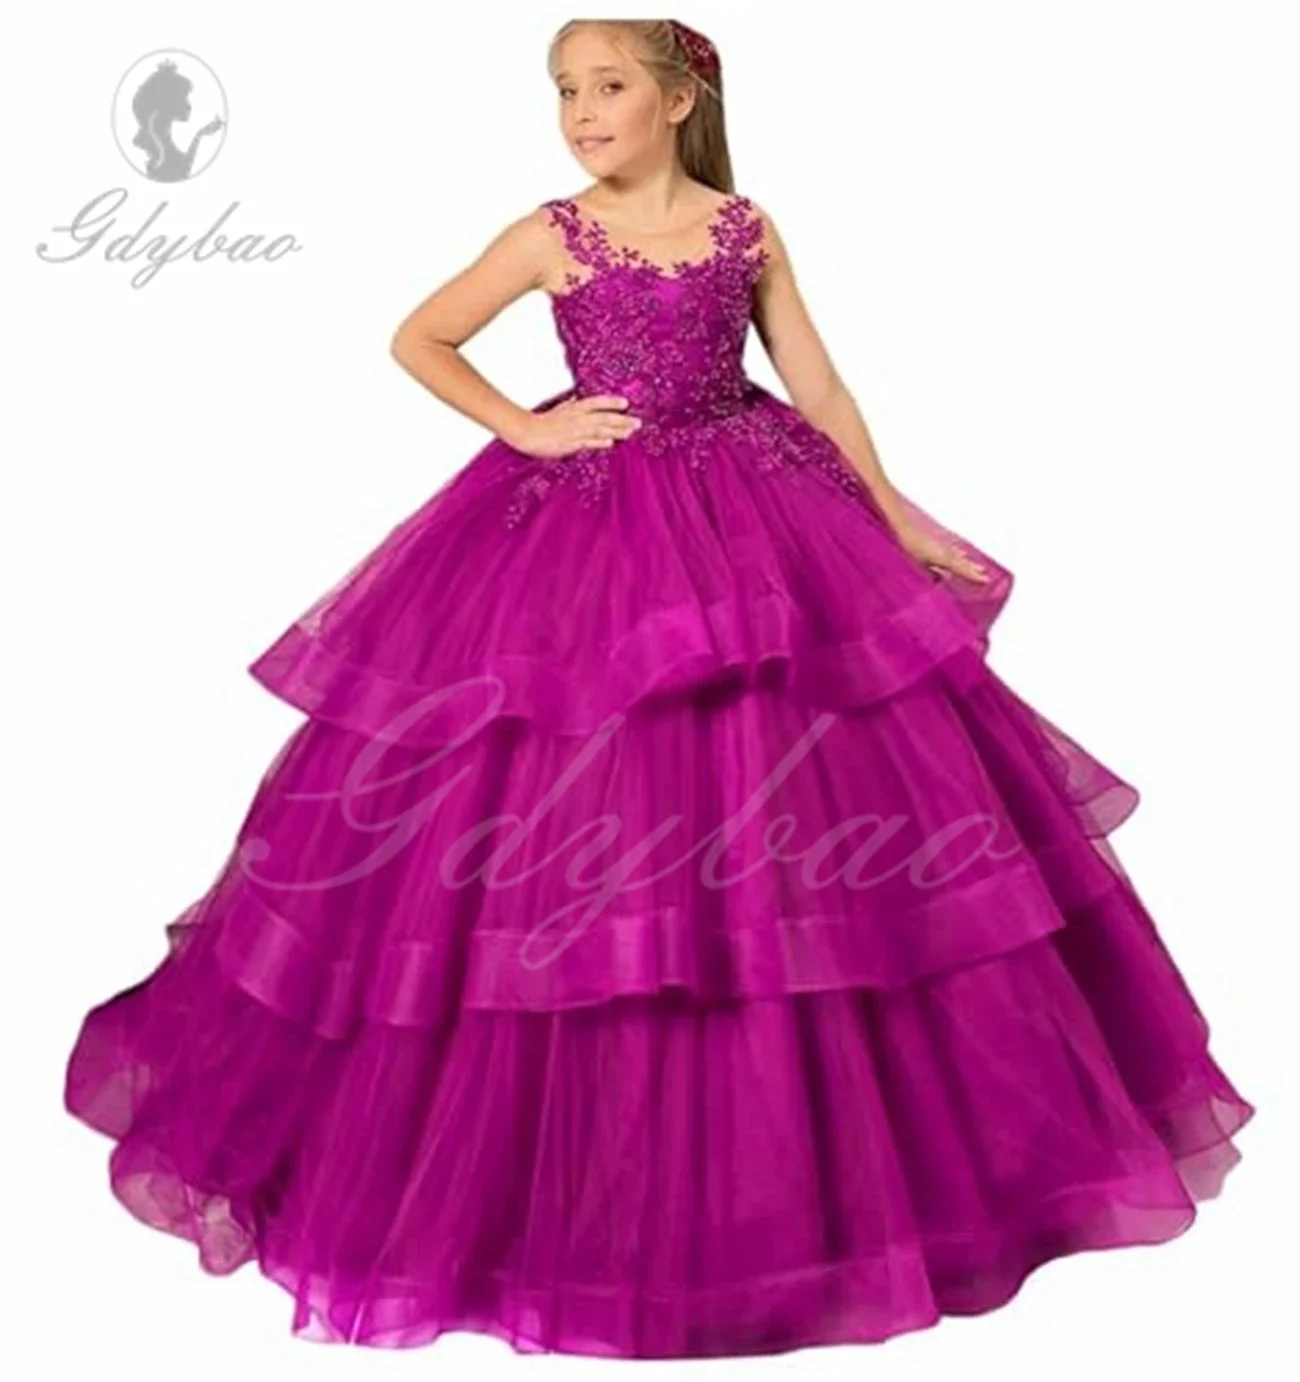 tulle-tiered-princess-flower-girl-dresses-girls-pageant-dresses-lace-applique-child-pageant-dress